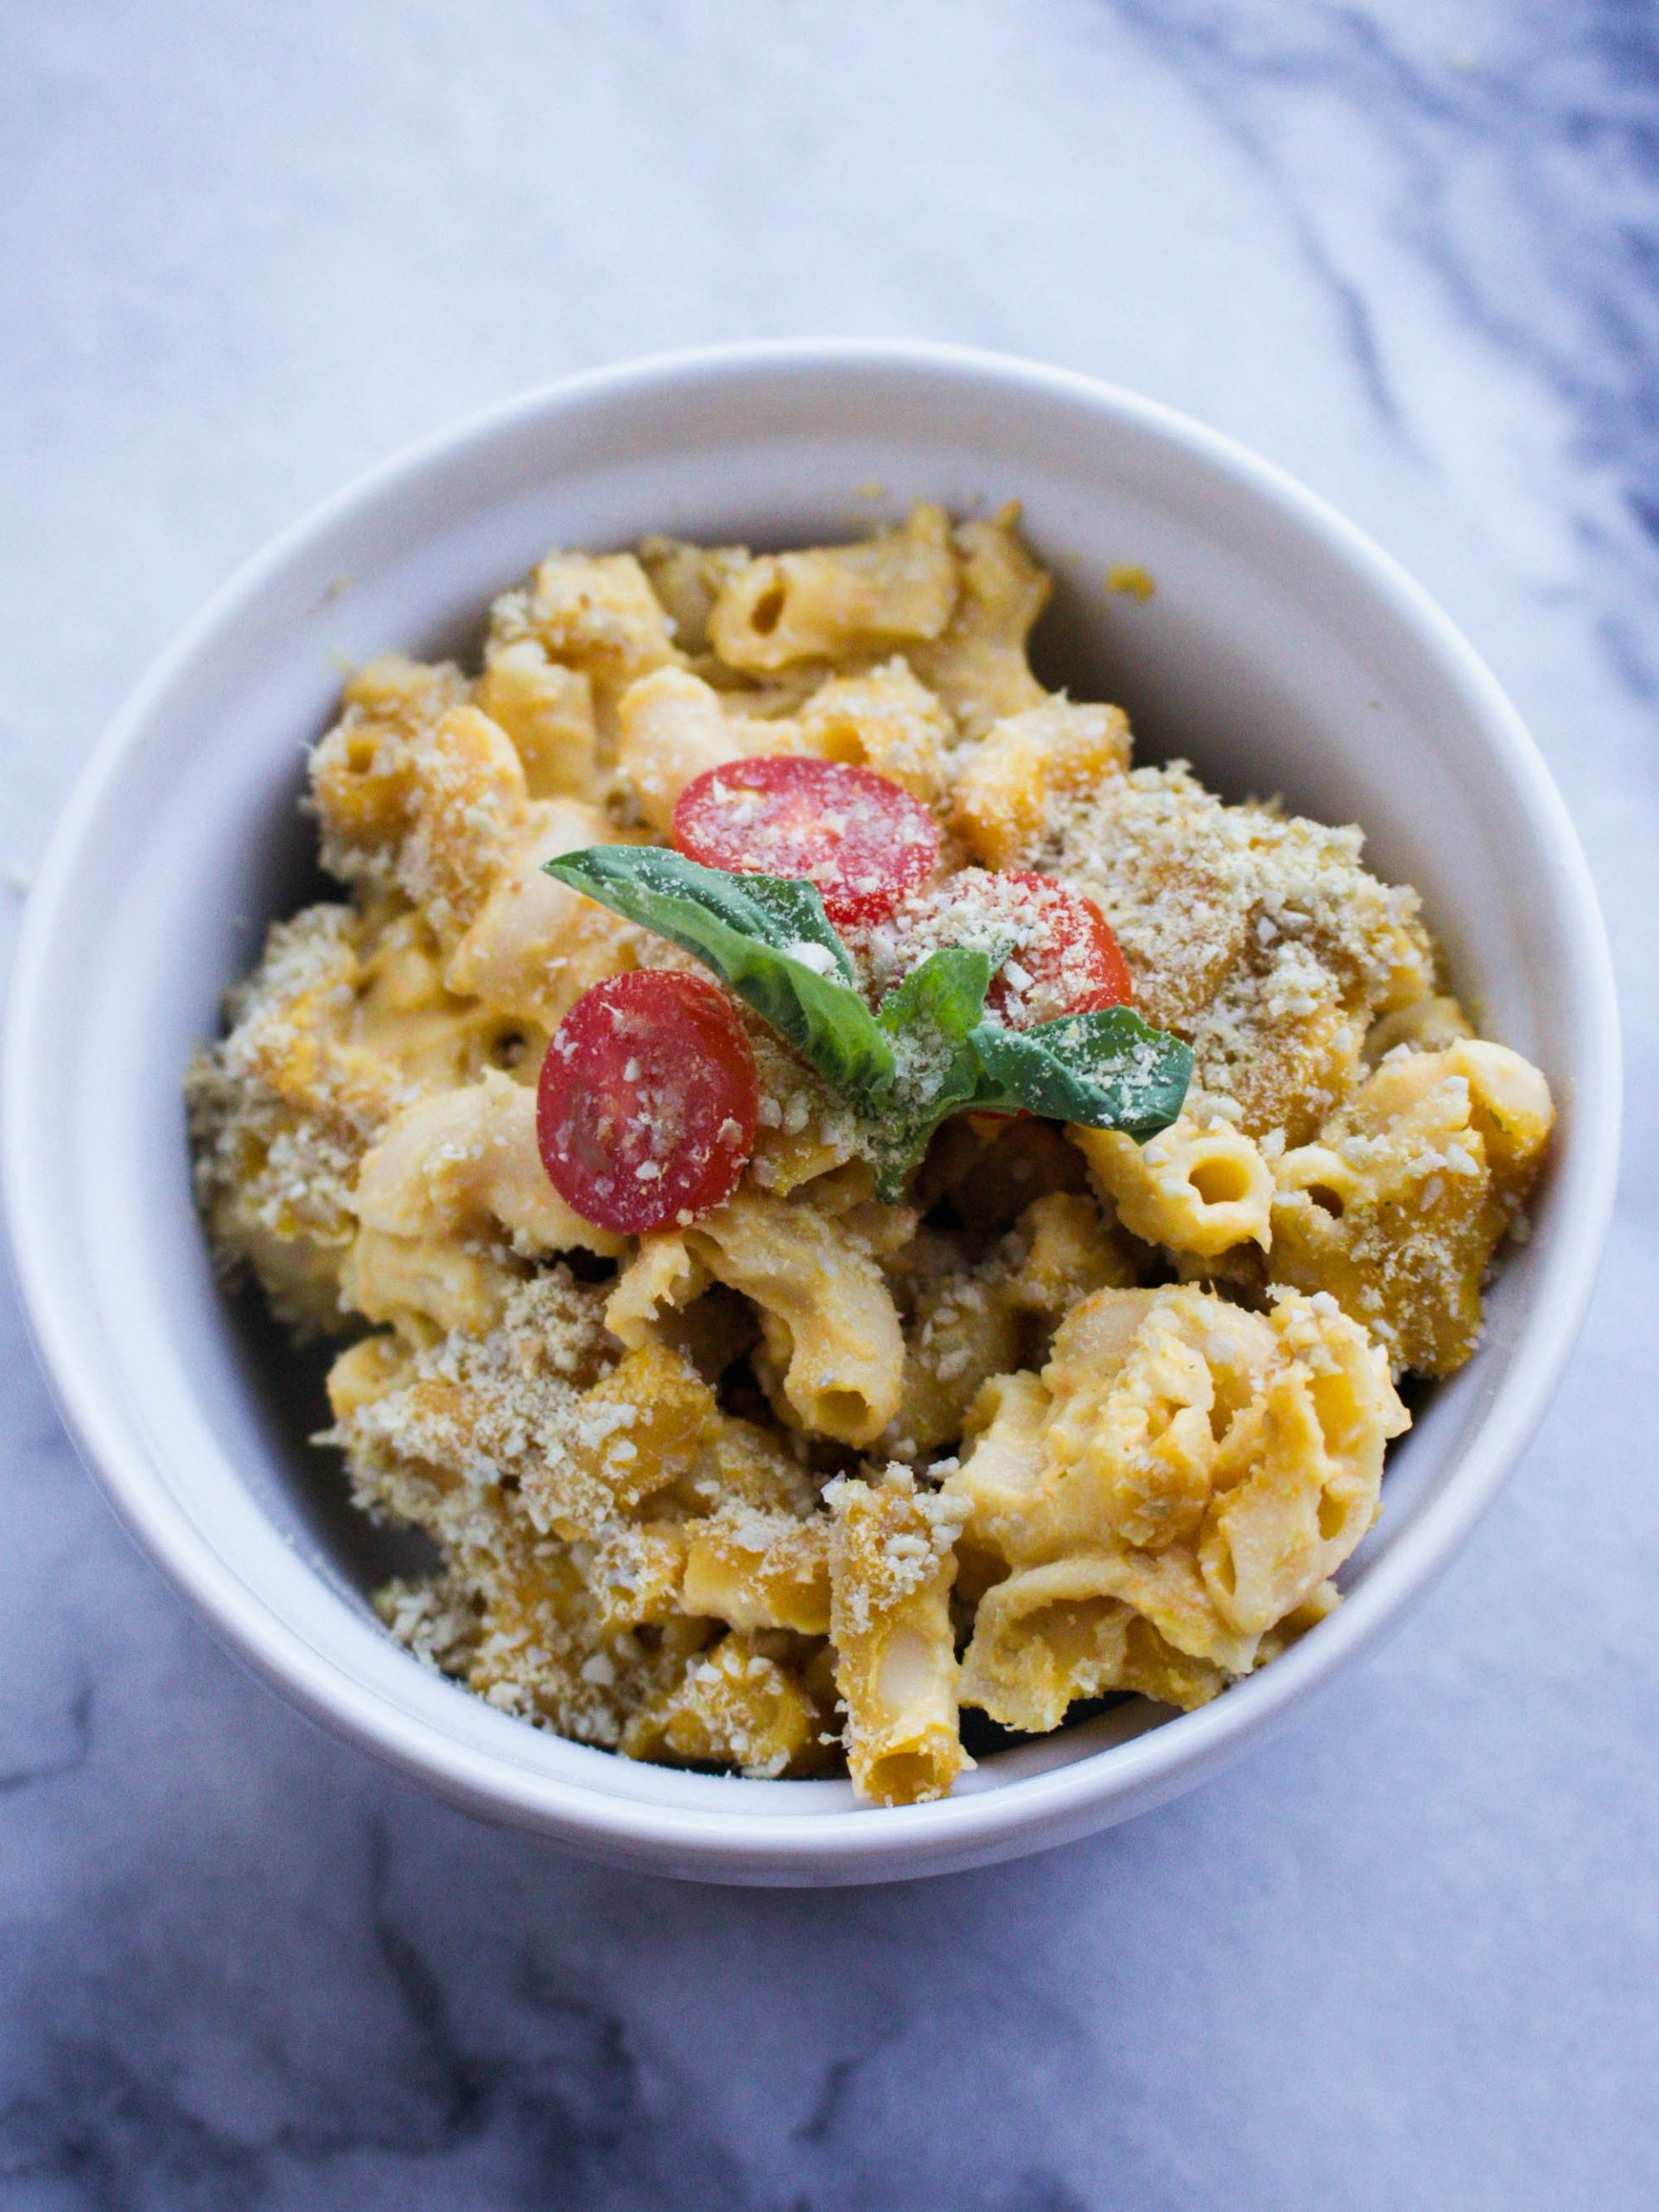 Gluten Free Baked Macaroni And Cheese
 Baked Vegan Mac and Cheese Gluten Free Nut Free From